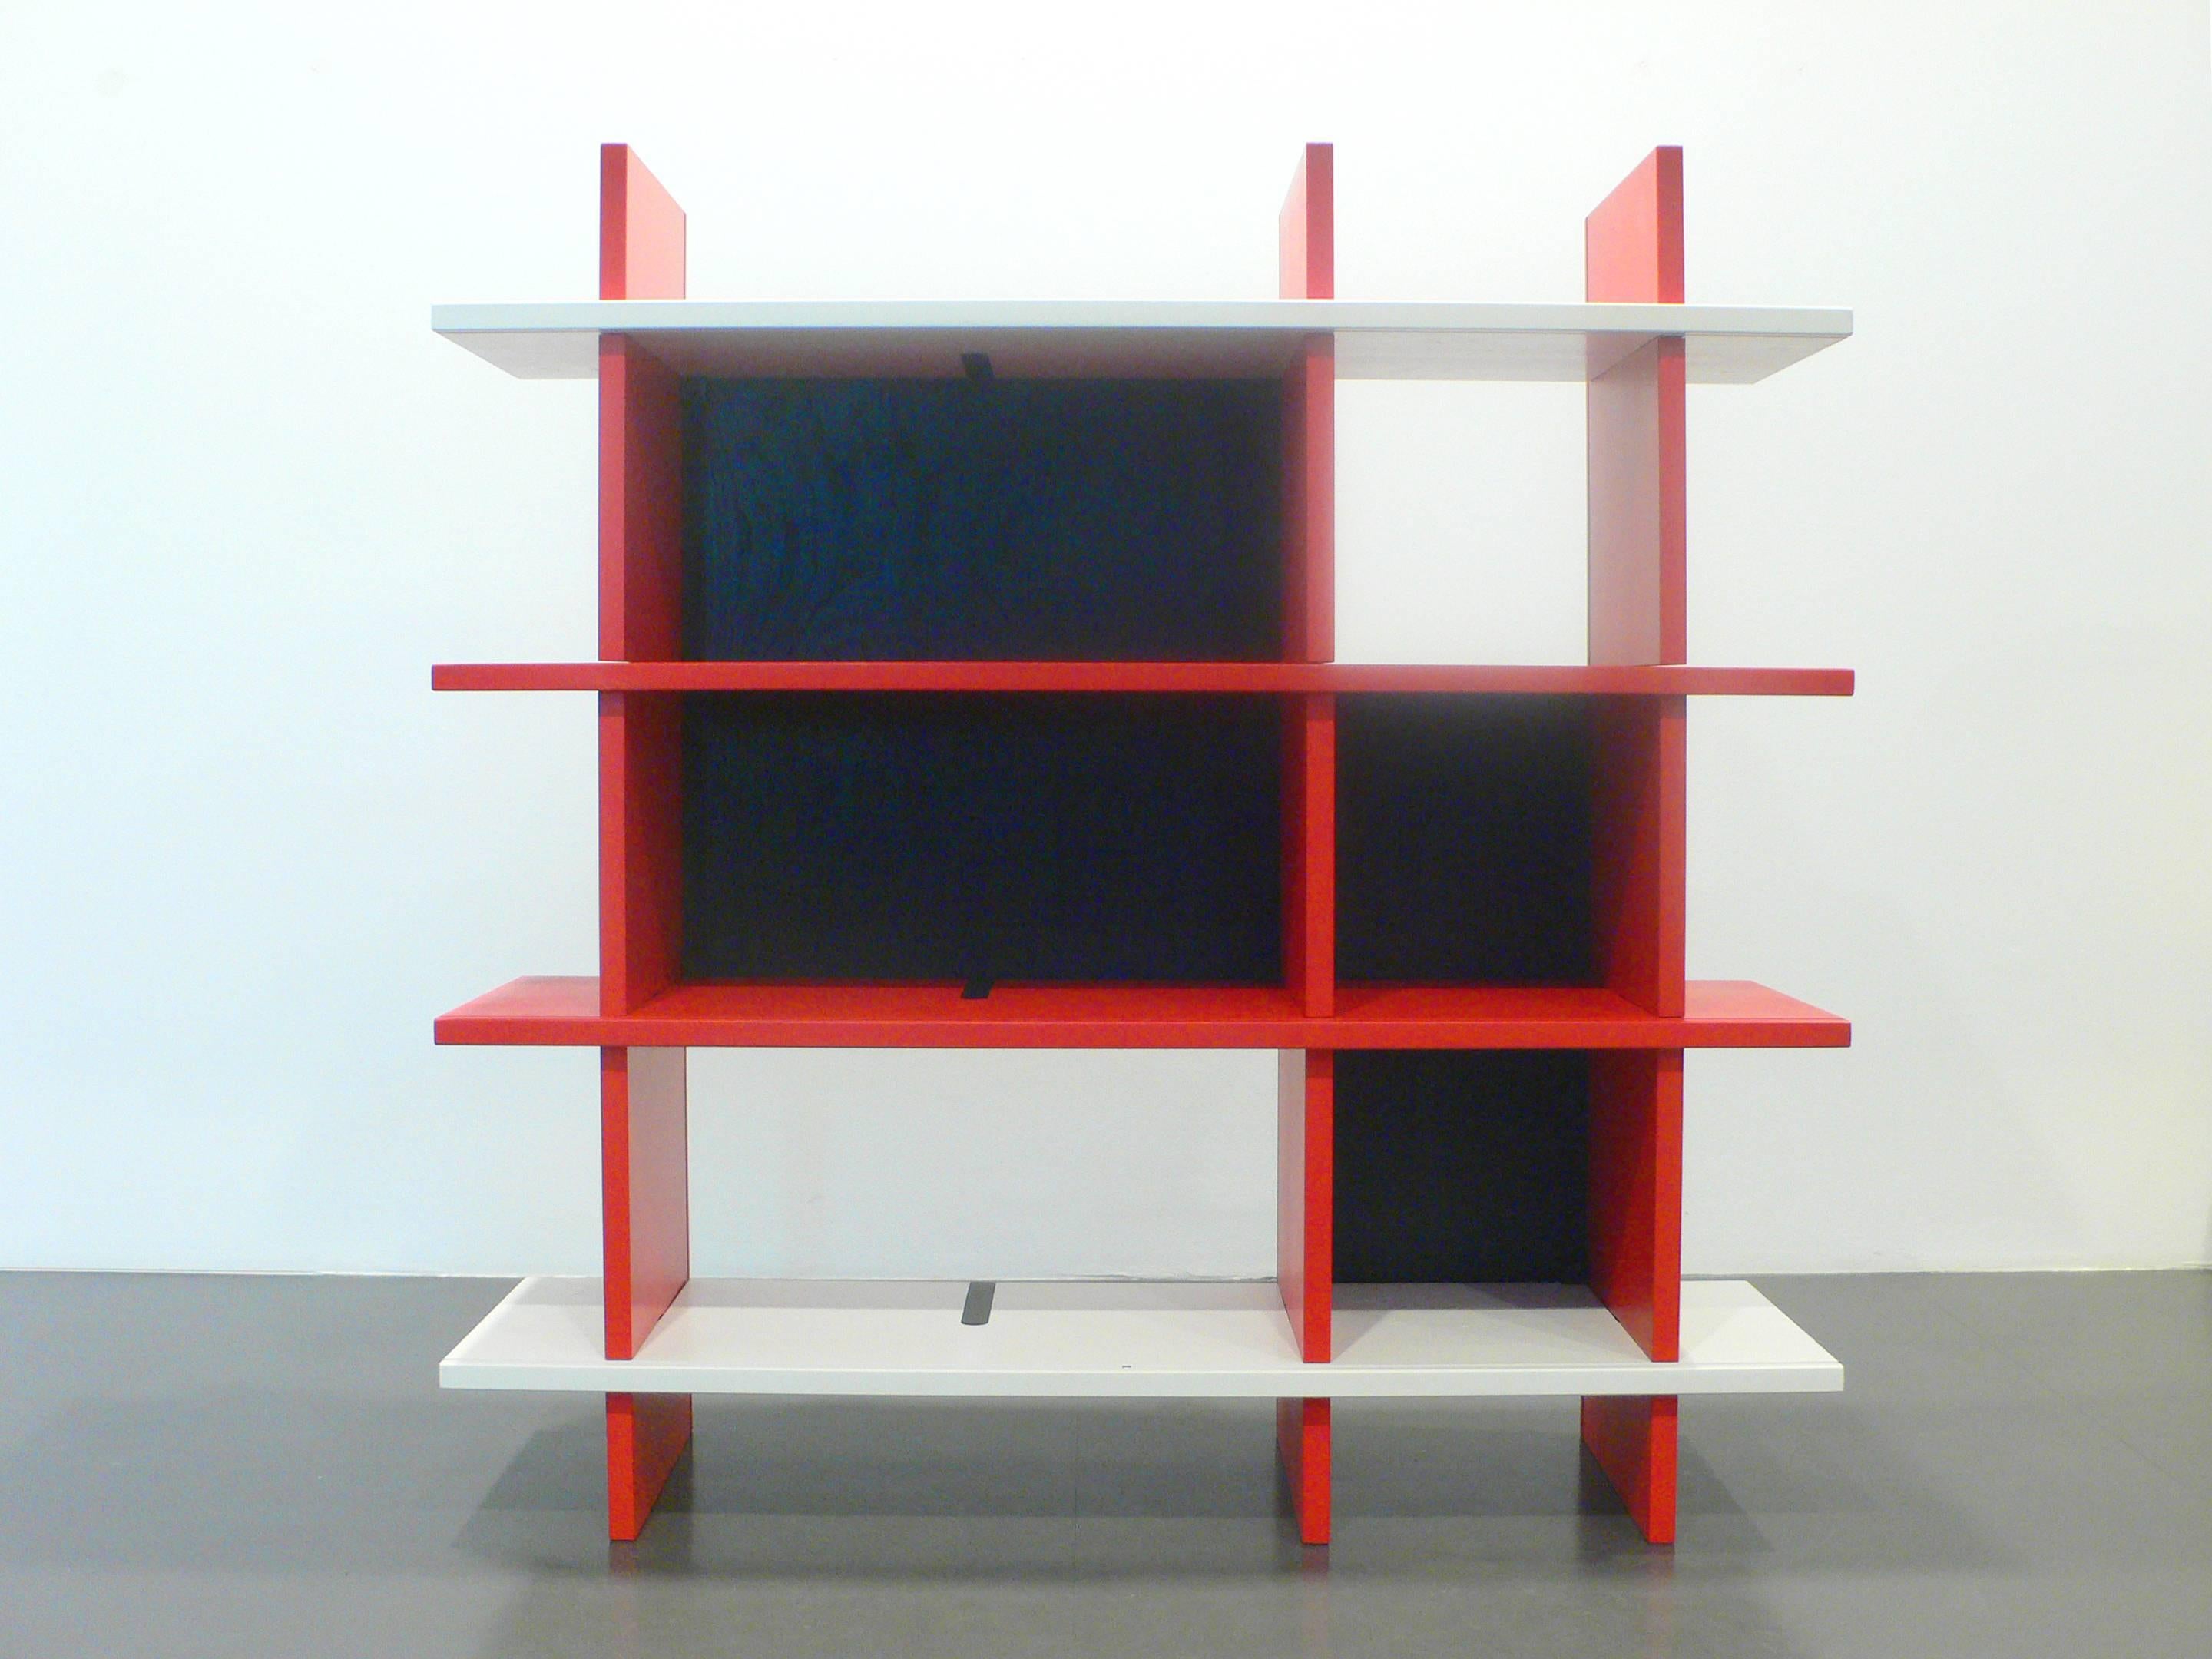 This modular system library is completely dismountable and holds its shelves without any screws. Therefore it has a very elegant appearance. It is varnished in three different colors. In 1966 it was designed by Eugenio Gerly and manufactured by